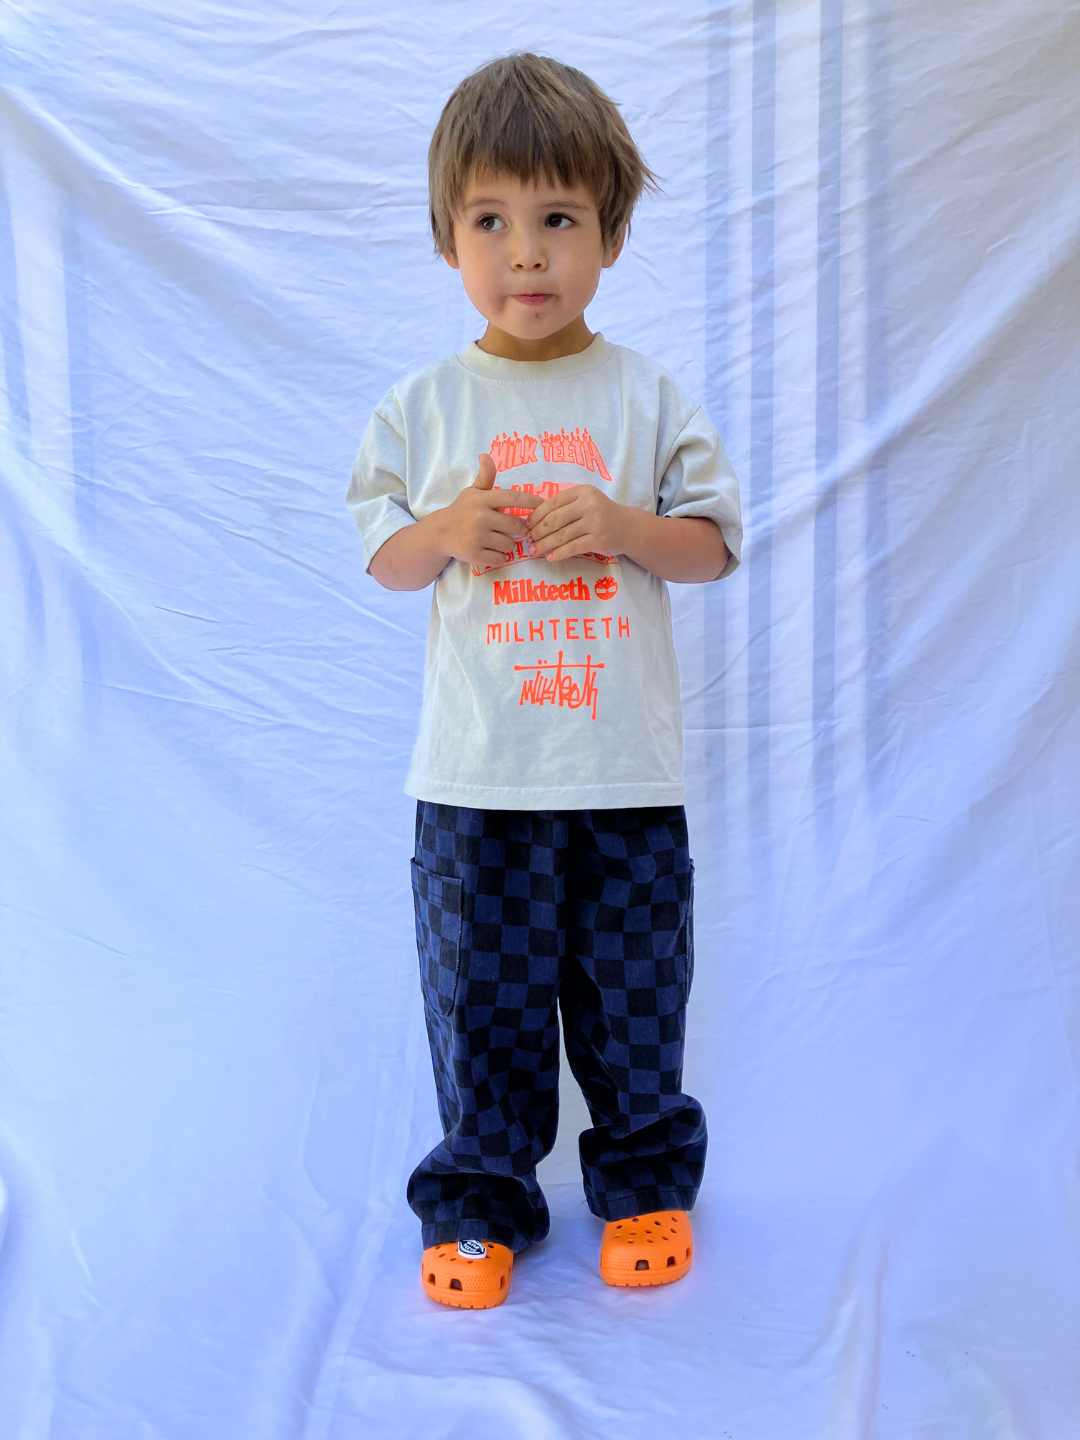 Cement | A child wearing a light grey t-shirt with Milk Teeth spelled out in various fonts in orange ink. He wears navy and black checkered pants and orange Crocs and is standing in front of a white sheet backdrop.